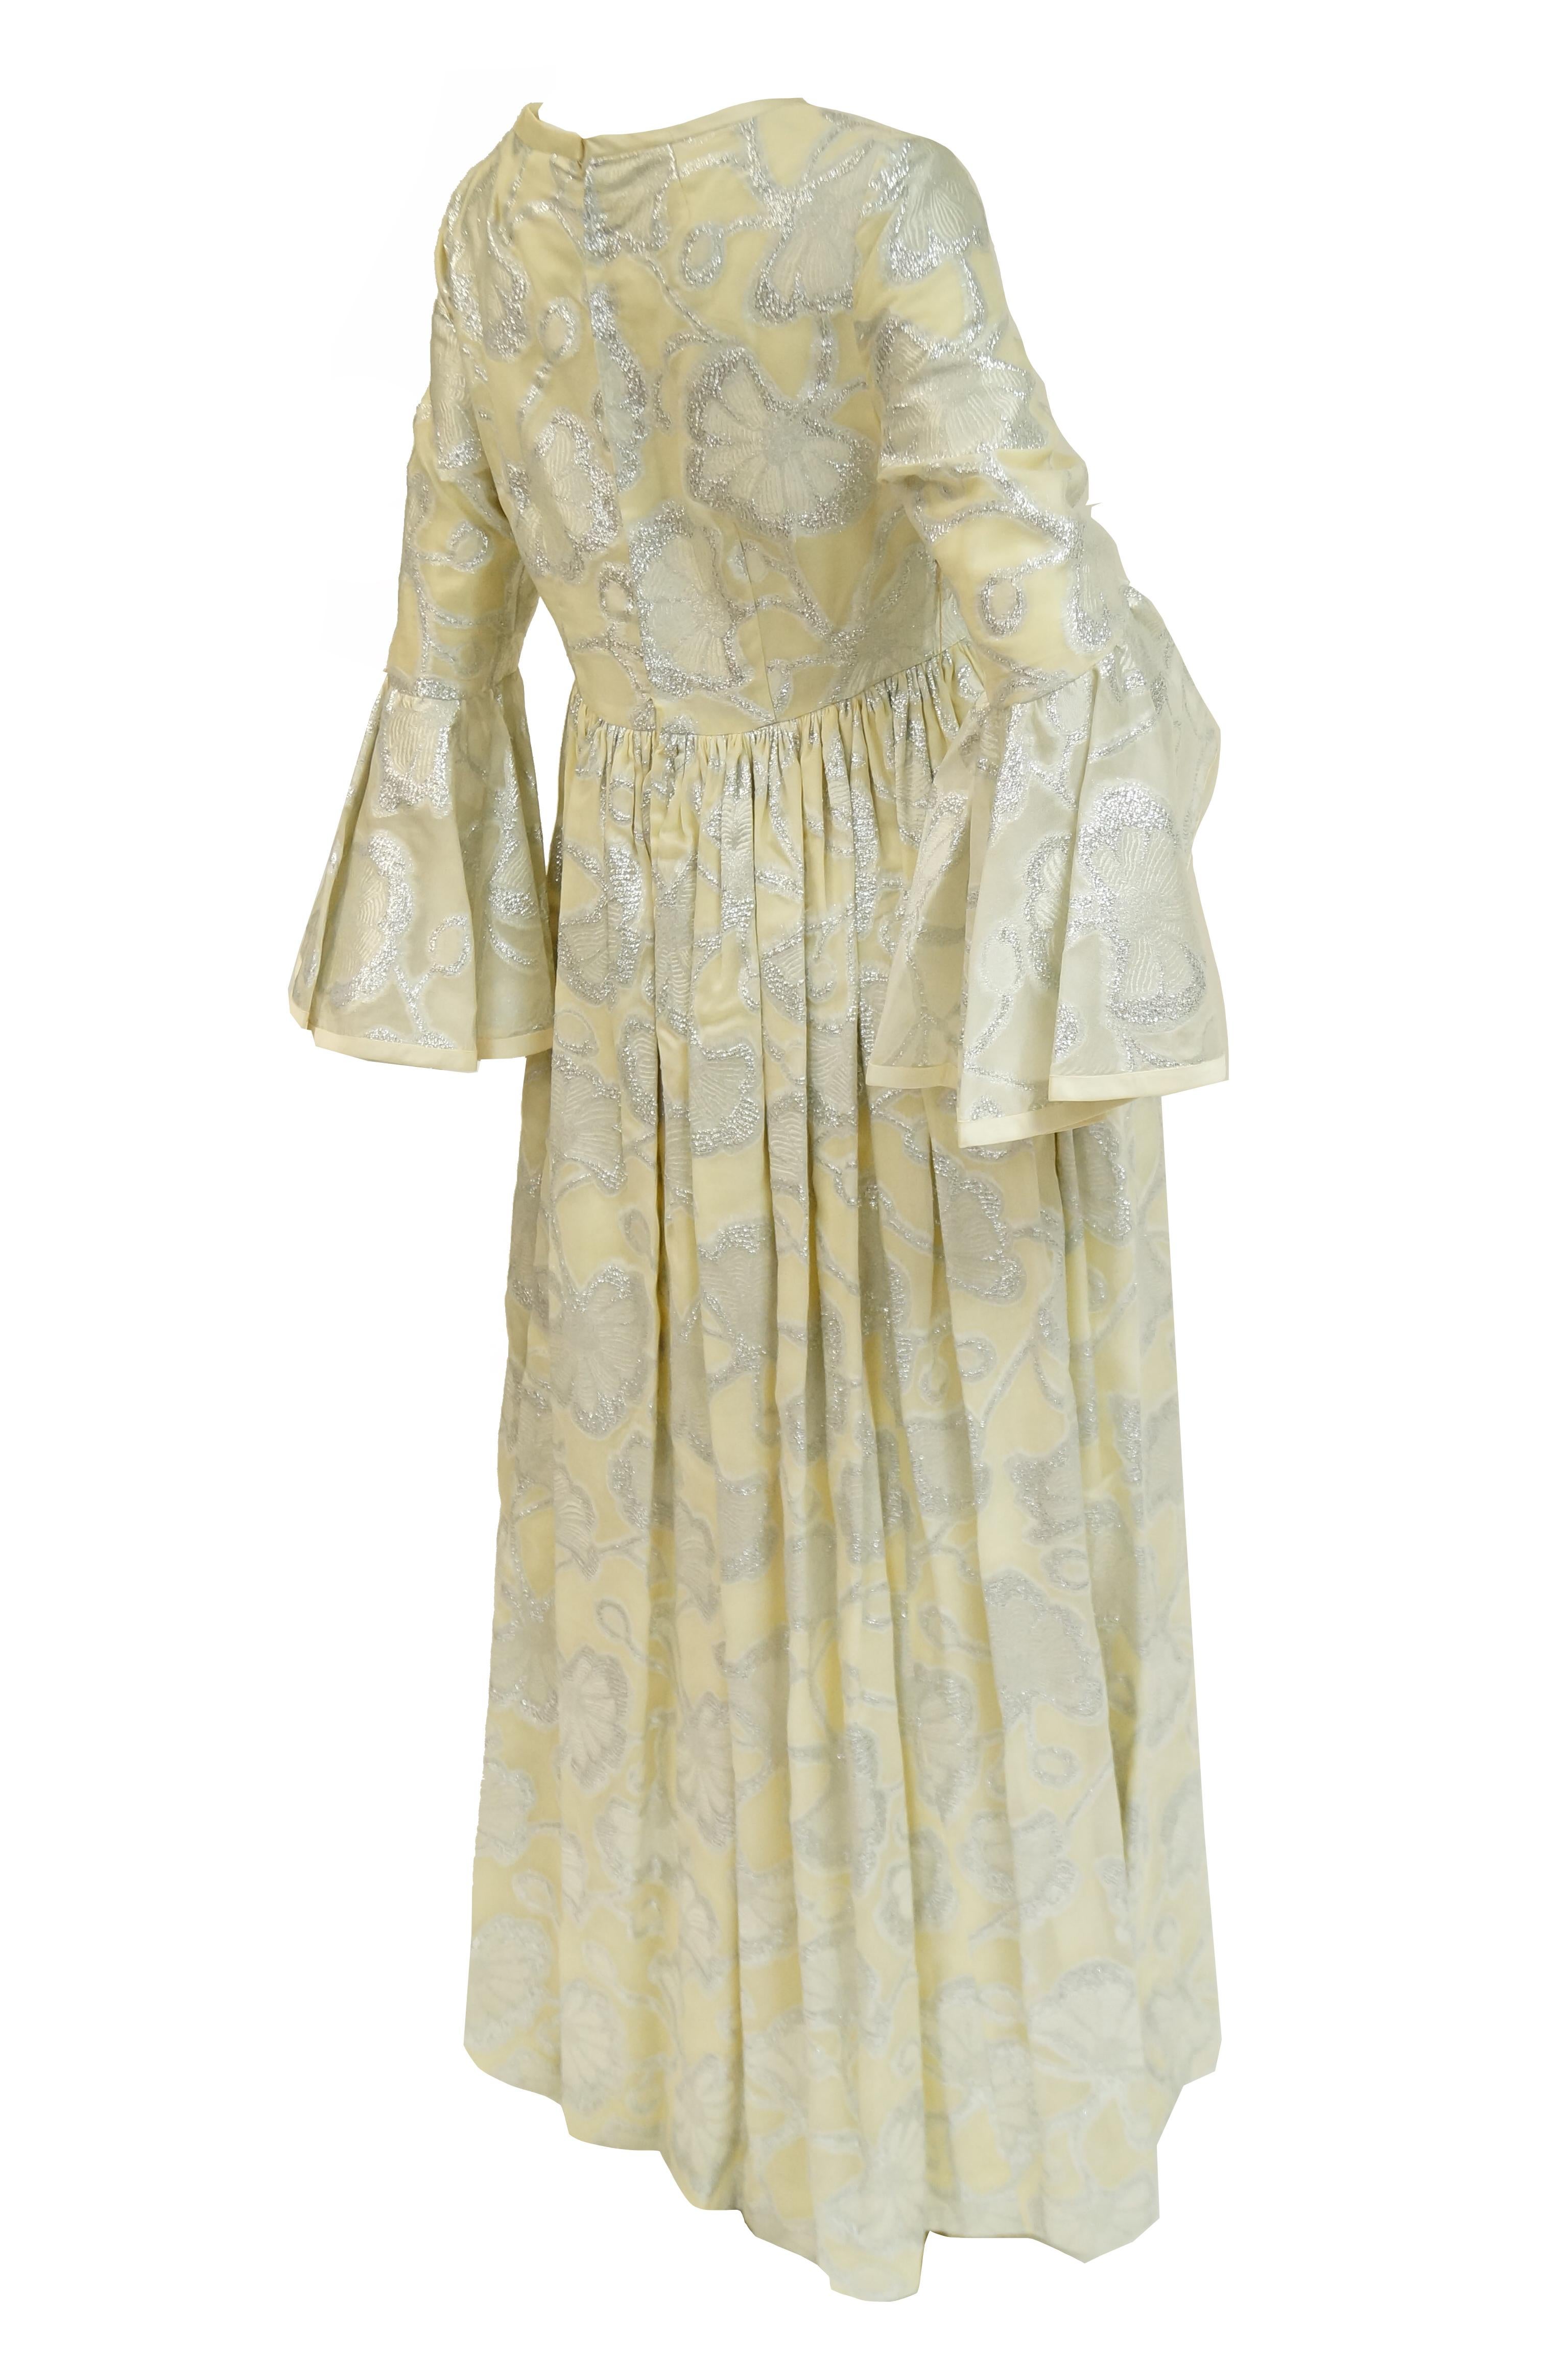 Women's 1970s Lisa Meril Cream and Silver Floral Brocade Empire Waist Evening Dress For Sale